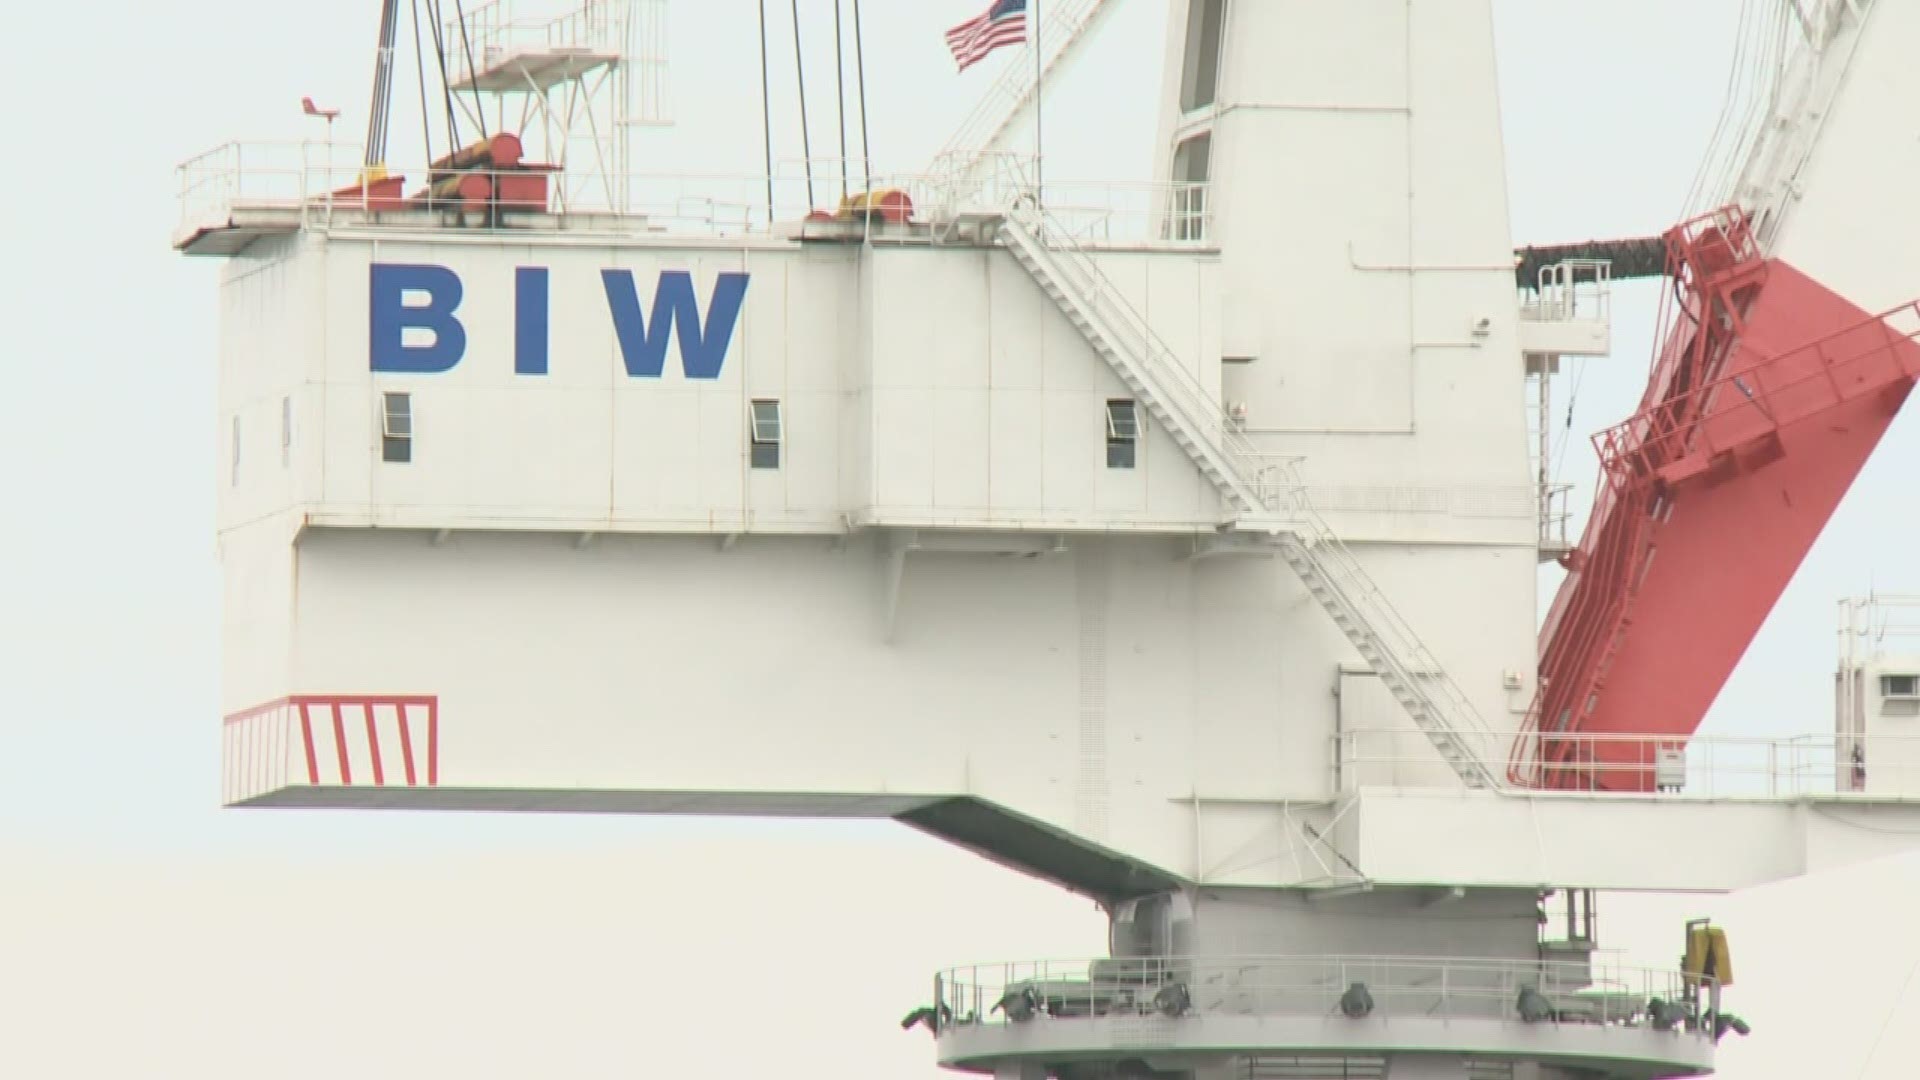 Bath Iron Works (BIW) may get contract due to hurricane damage at competing shipyard